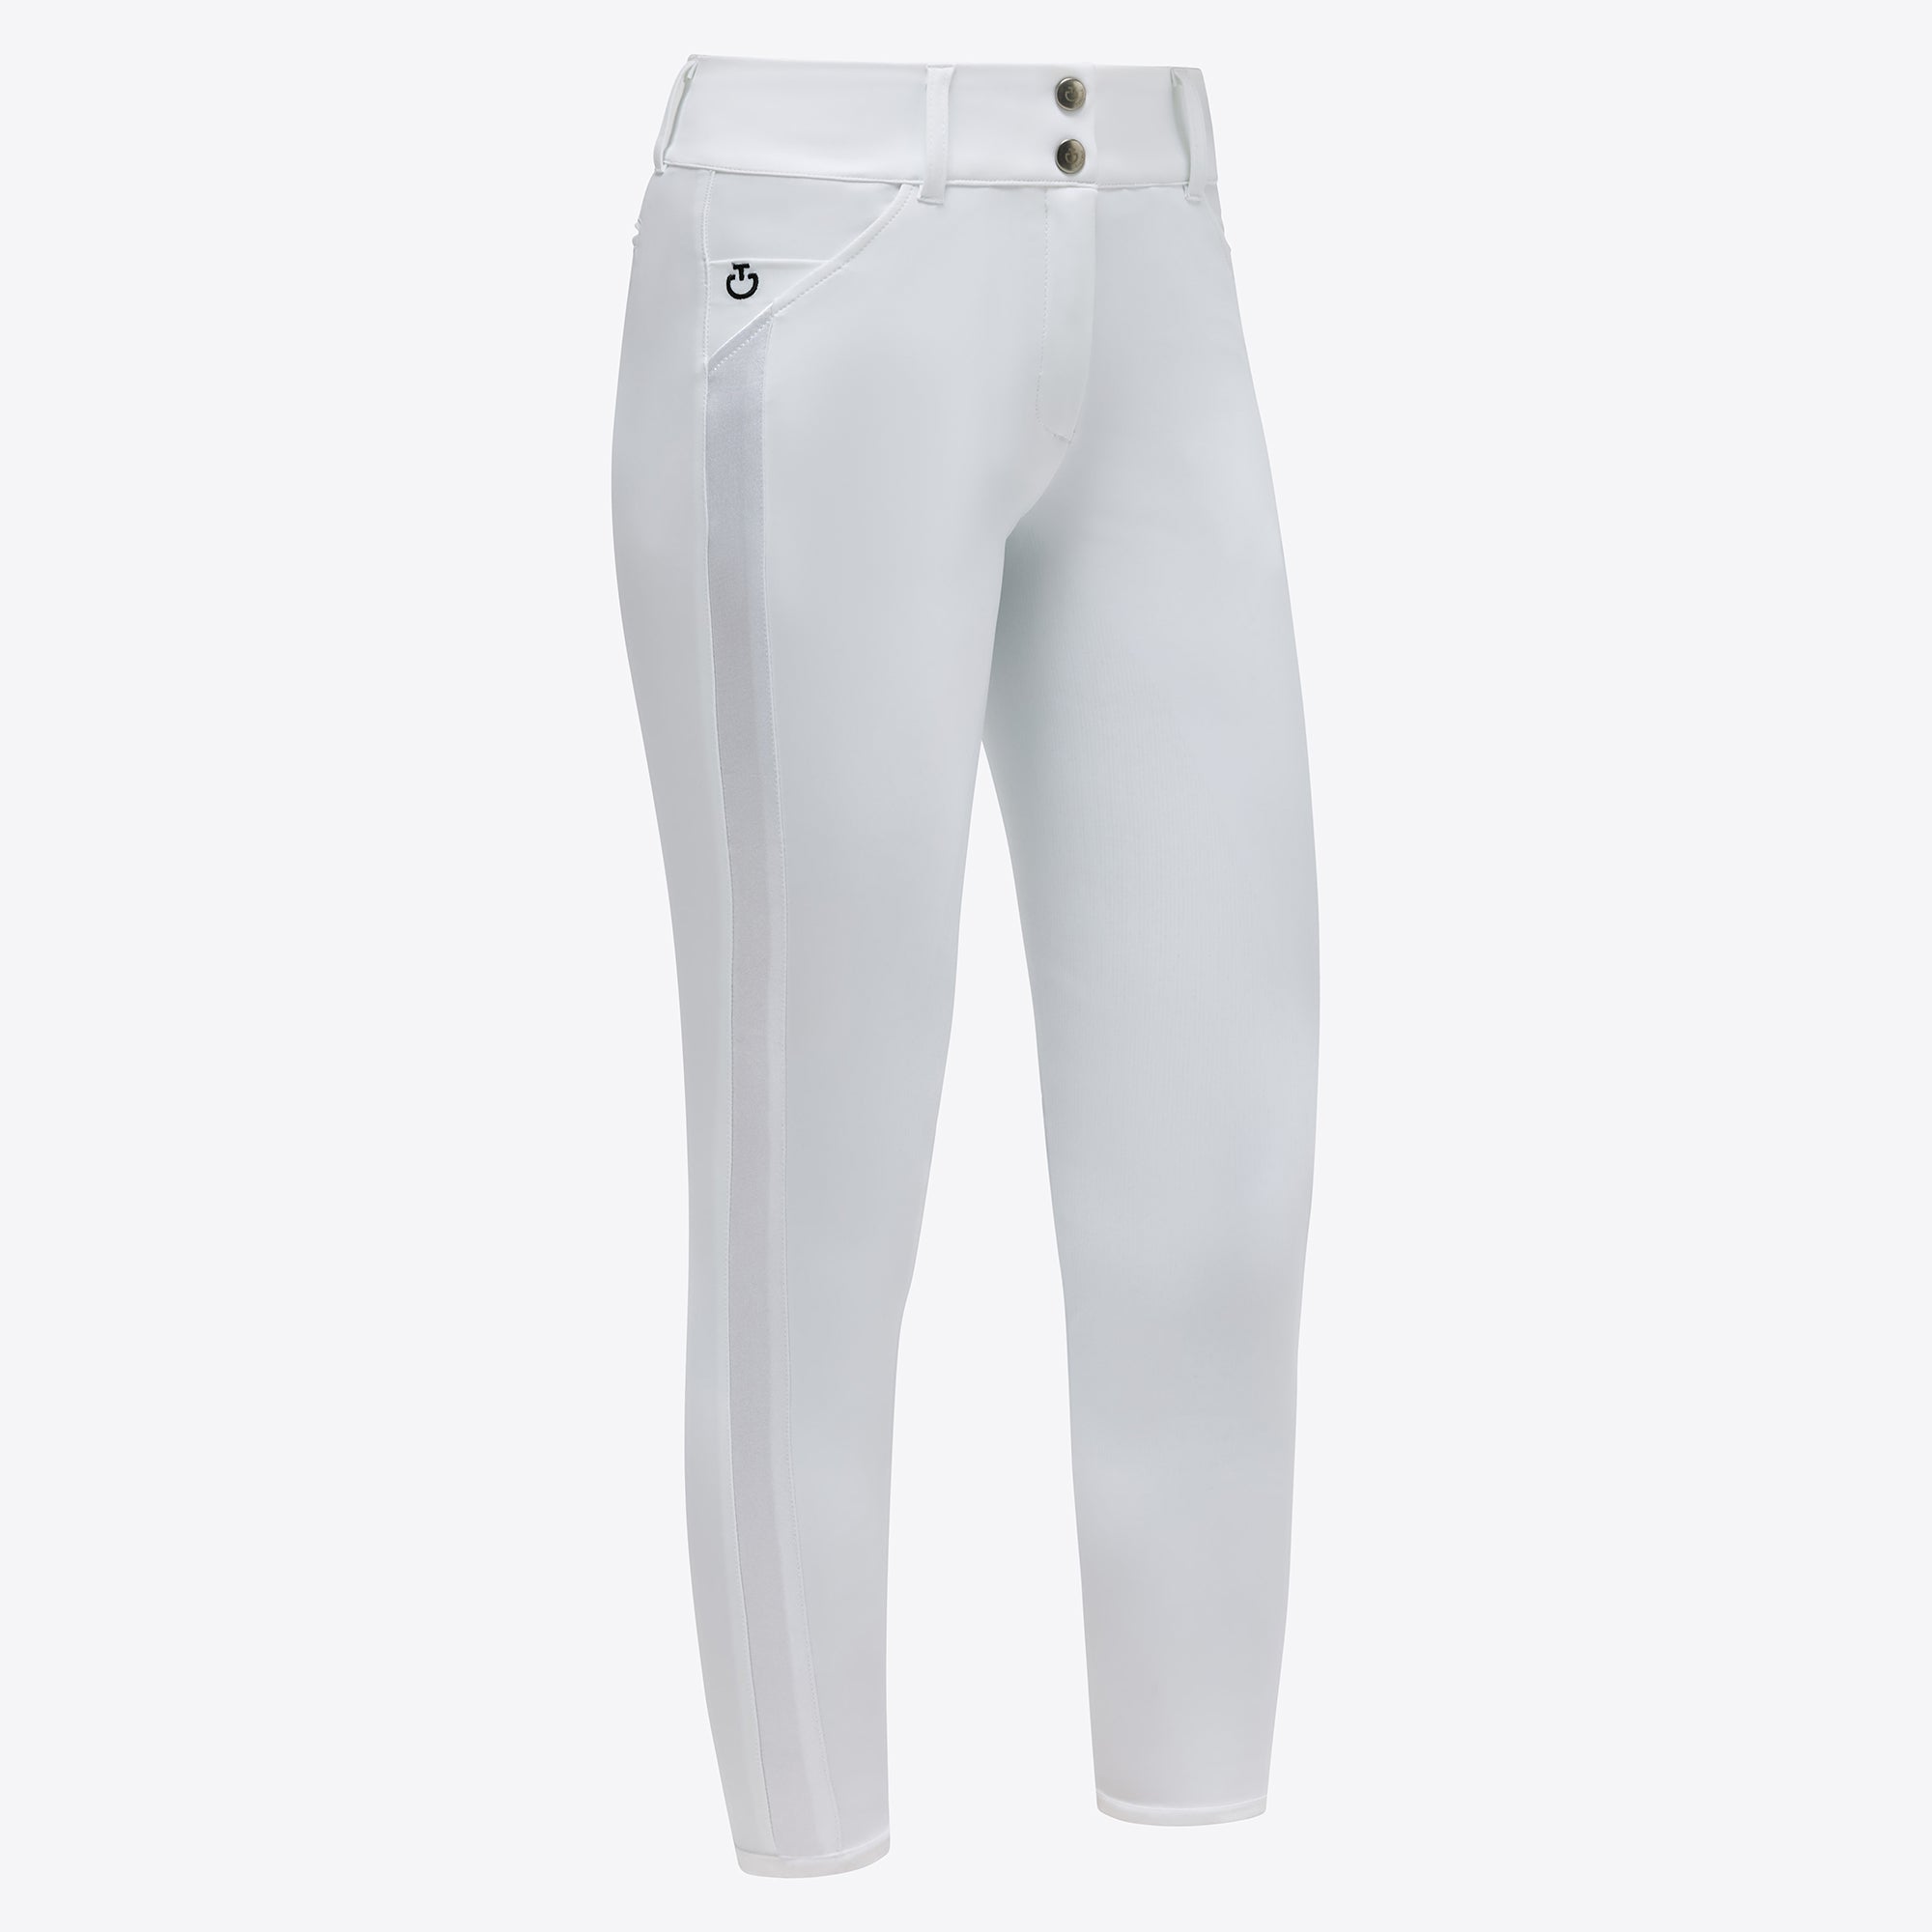 WOMEN'S FULL GRIP TUXEDO RIDING BREECHES COMPETITION PANTS